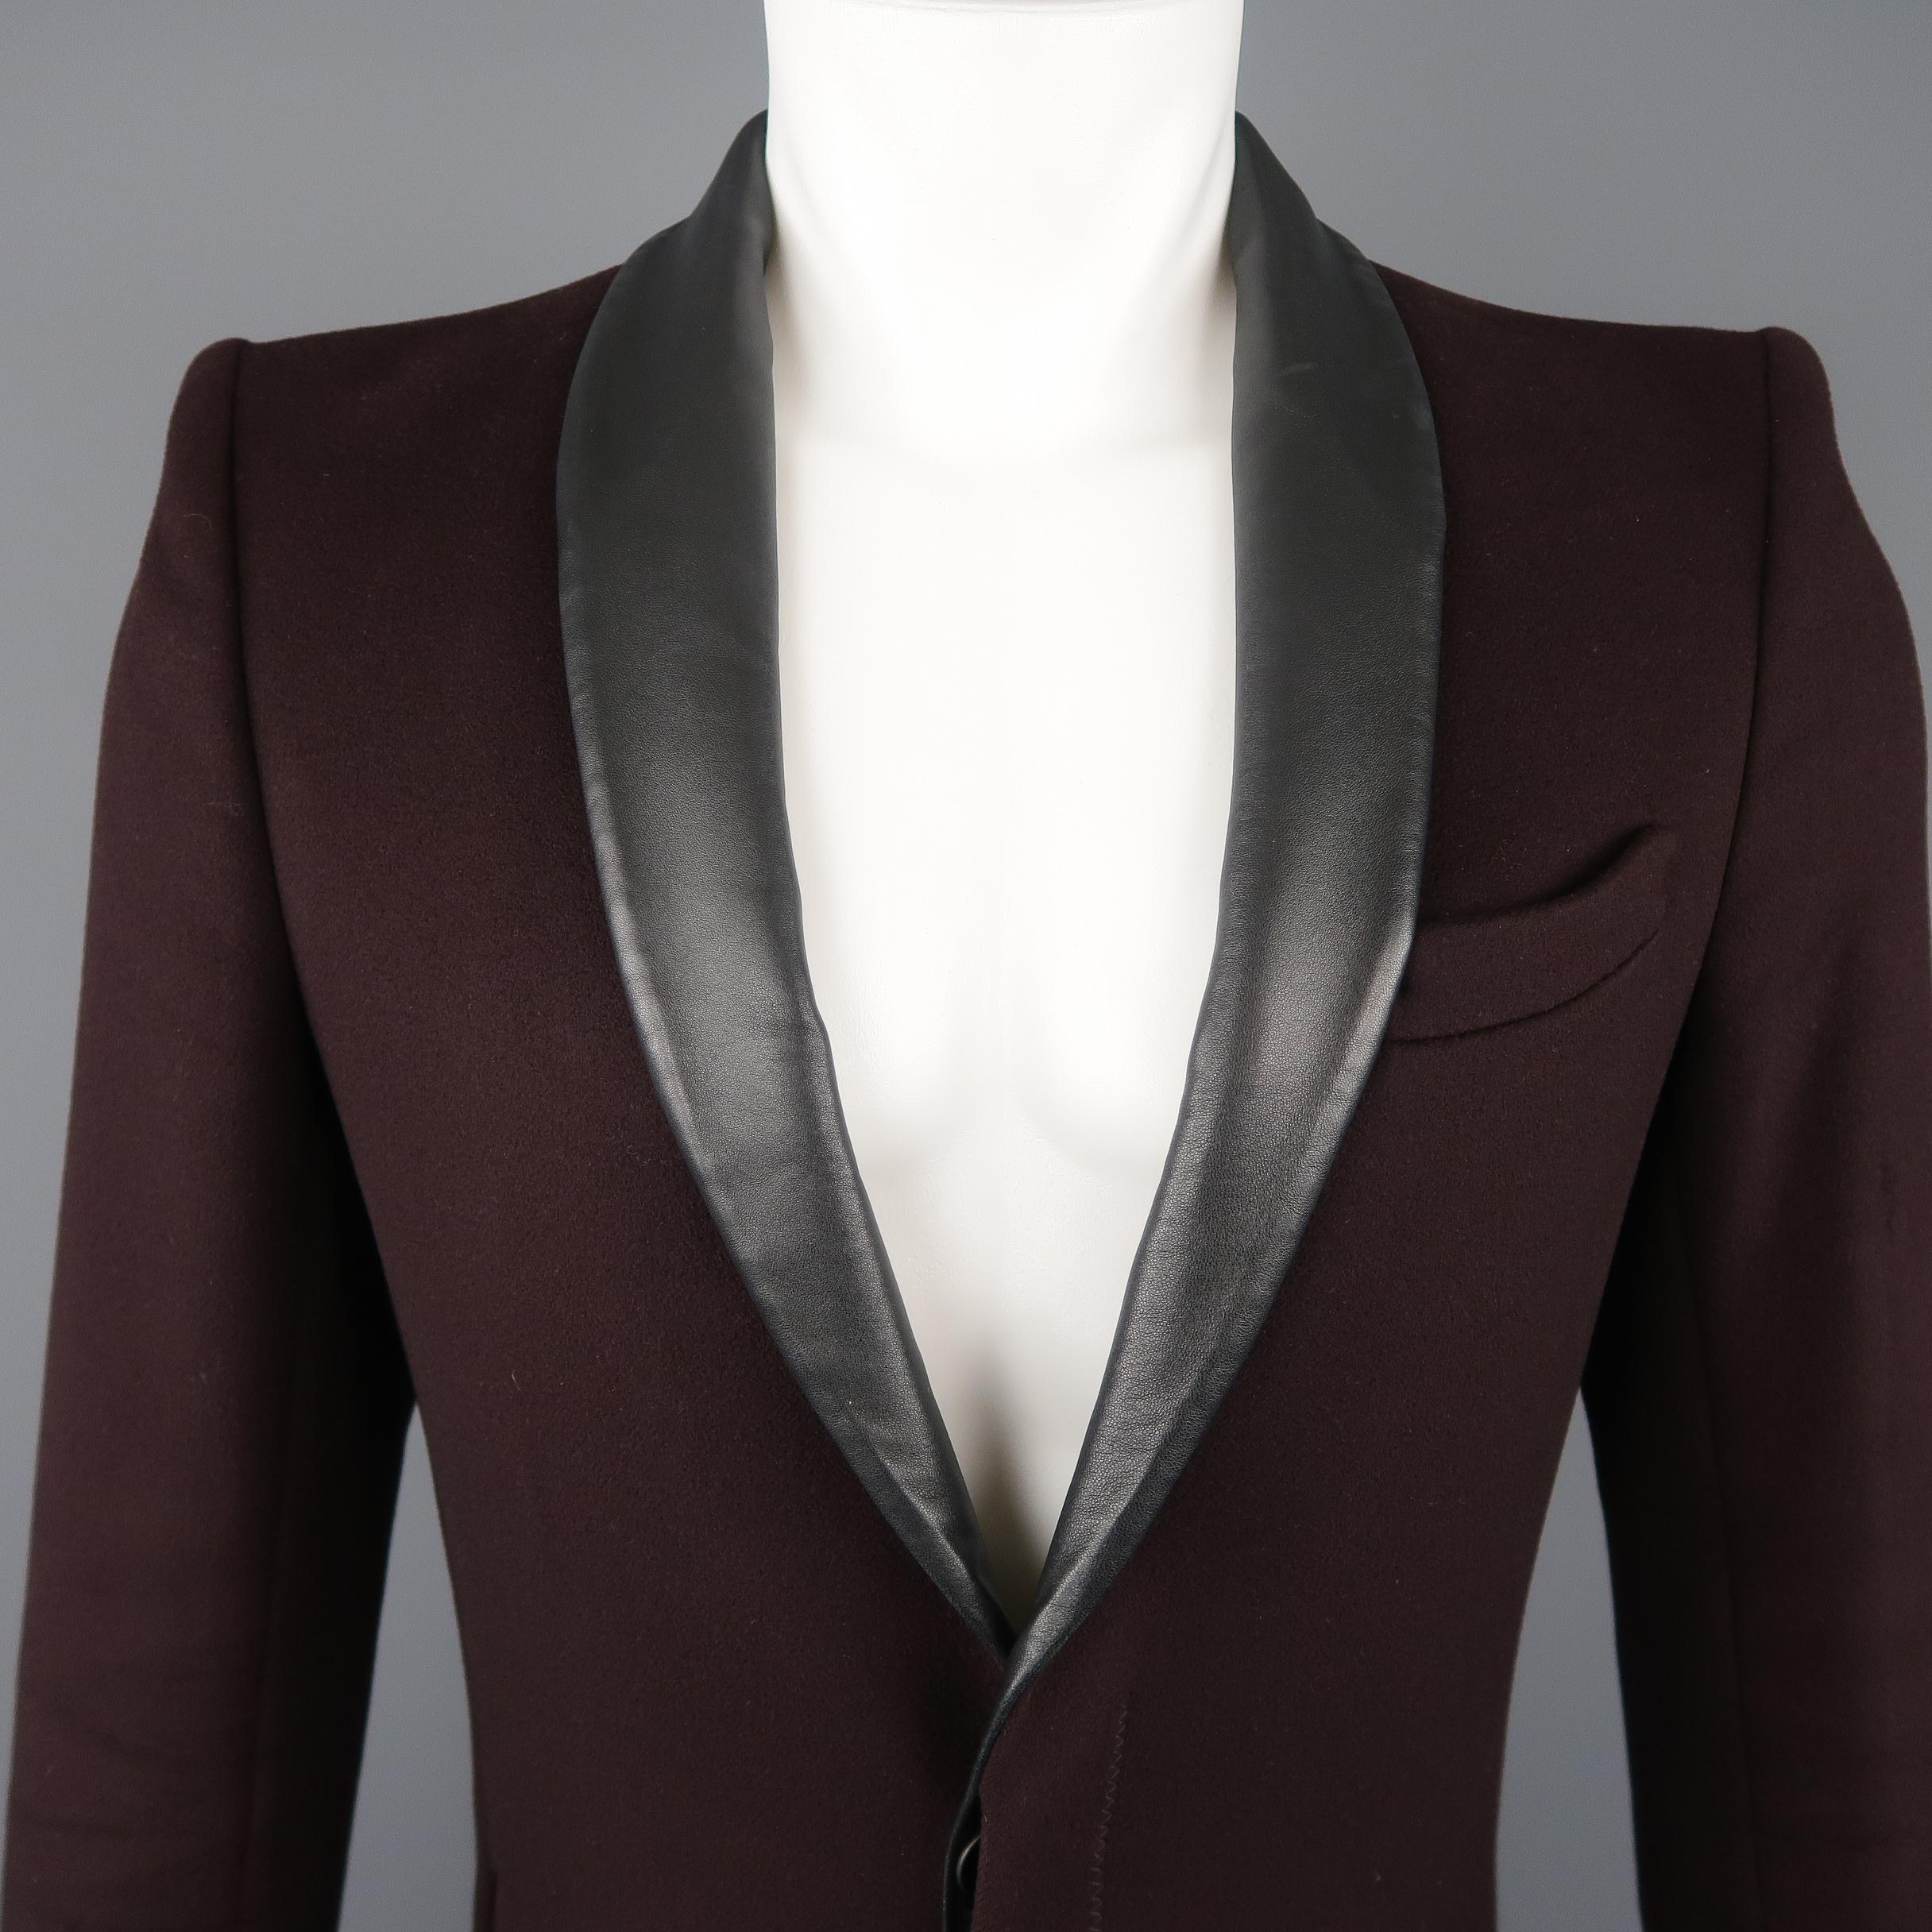 GAULTIER 2 by JEAN PAUL GAULTIER coat comes in plum felt with a hidden placket button up closure, slit pockets, zig zag top stitching, and faux leather shawl collar lapel.
 
Excellent Pre-Owned Condition.
Marked: 38
 
Measurements:
 
Shoulder: 18